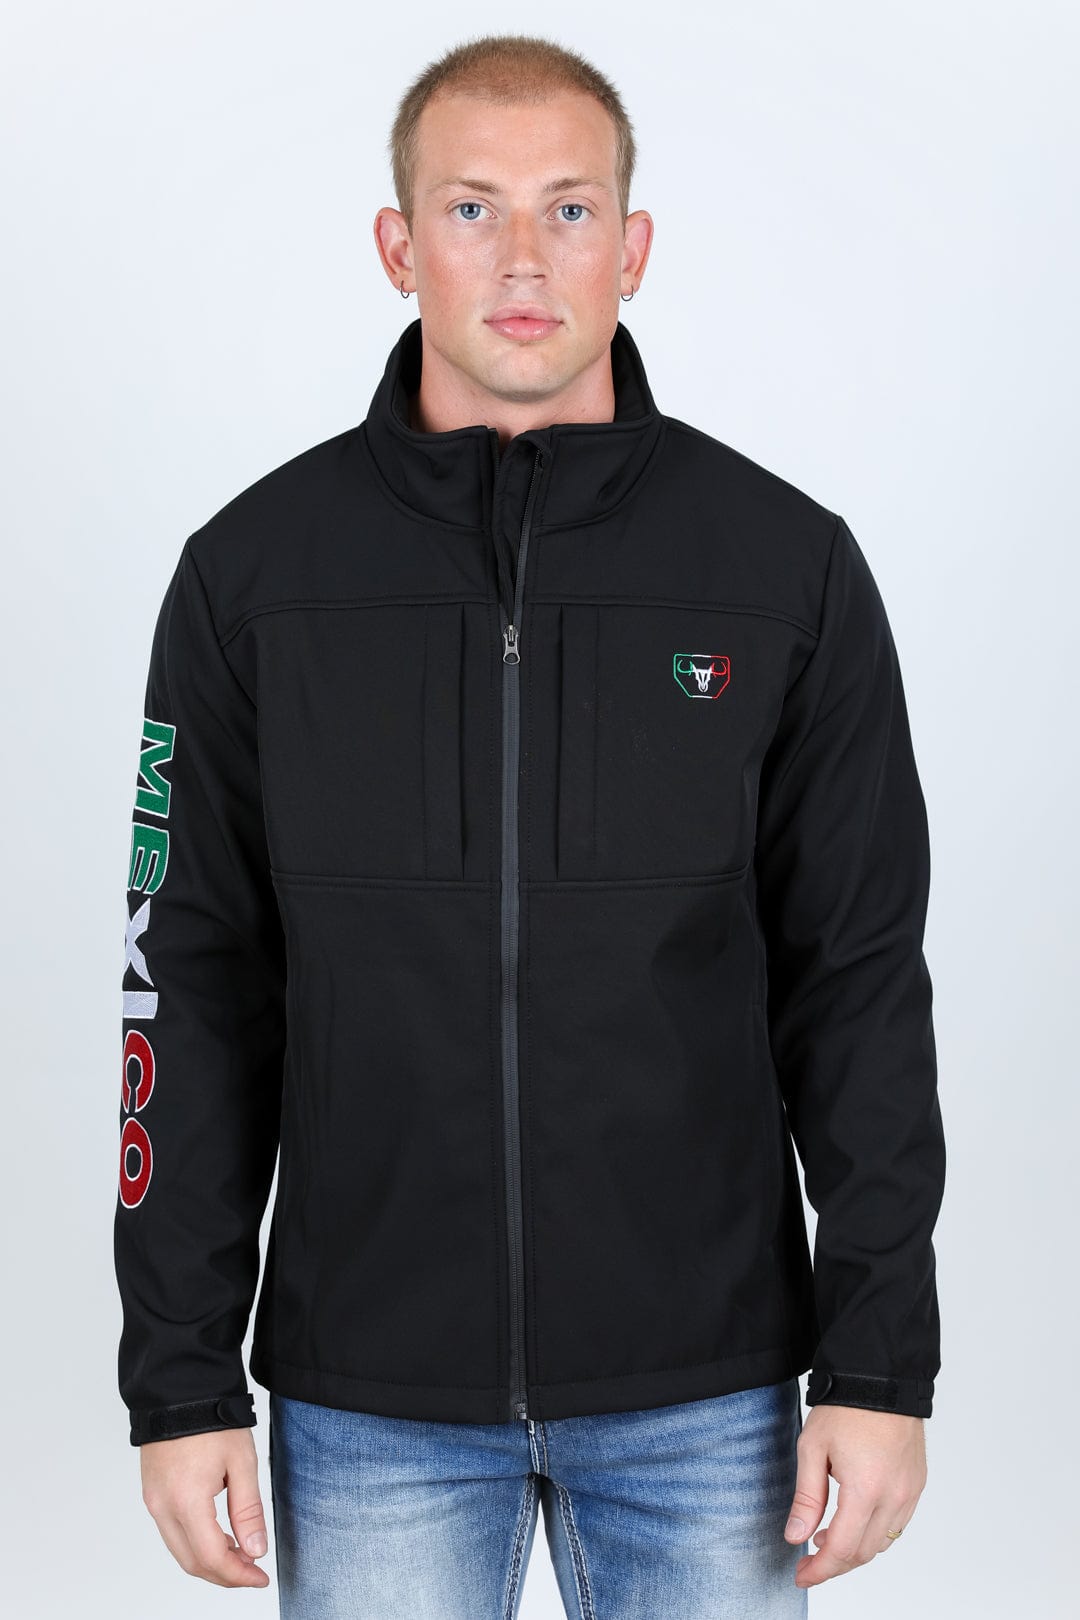 Platini Fashion Outerwear Mens Softshell Water-Resistant Jacket with Mexico Embroidery - Black